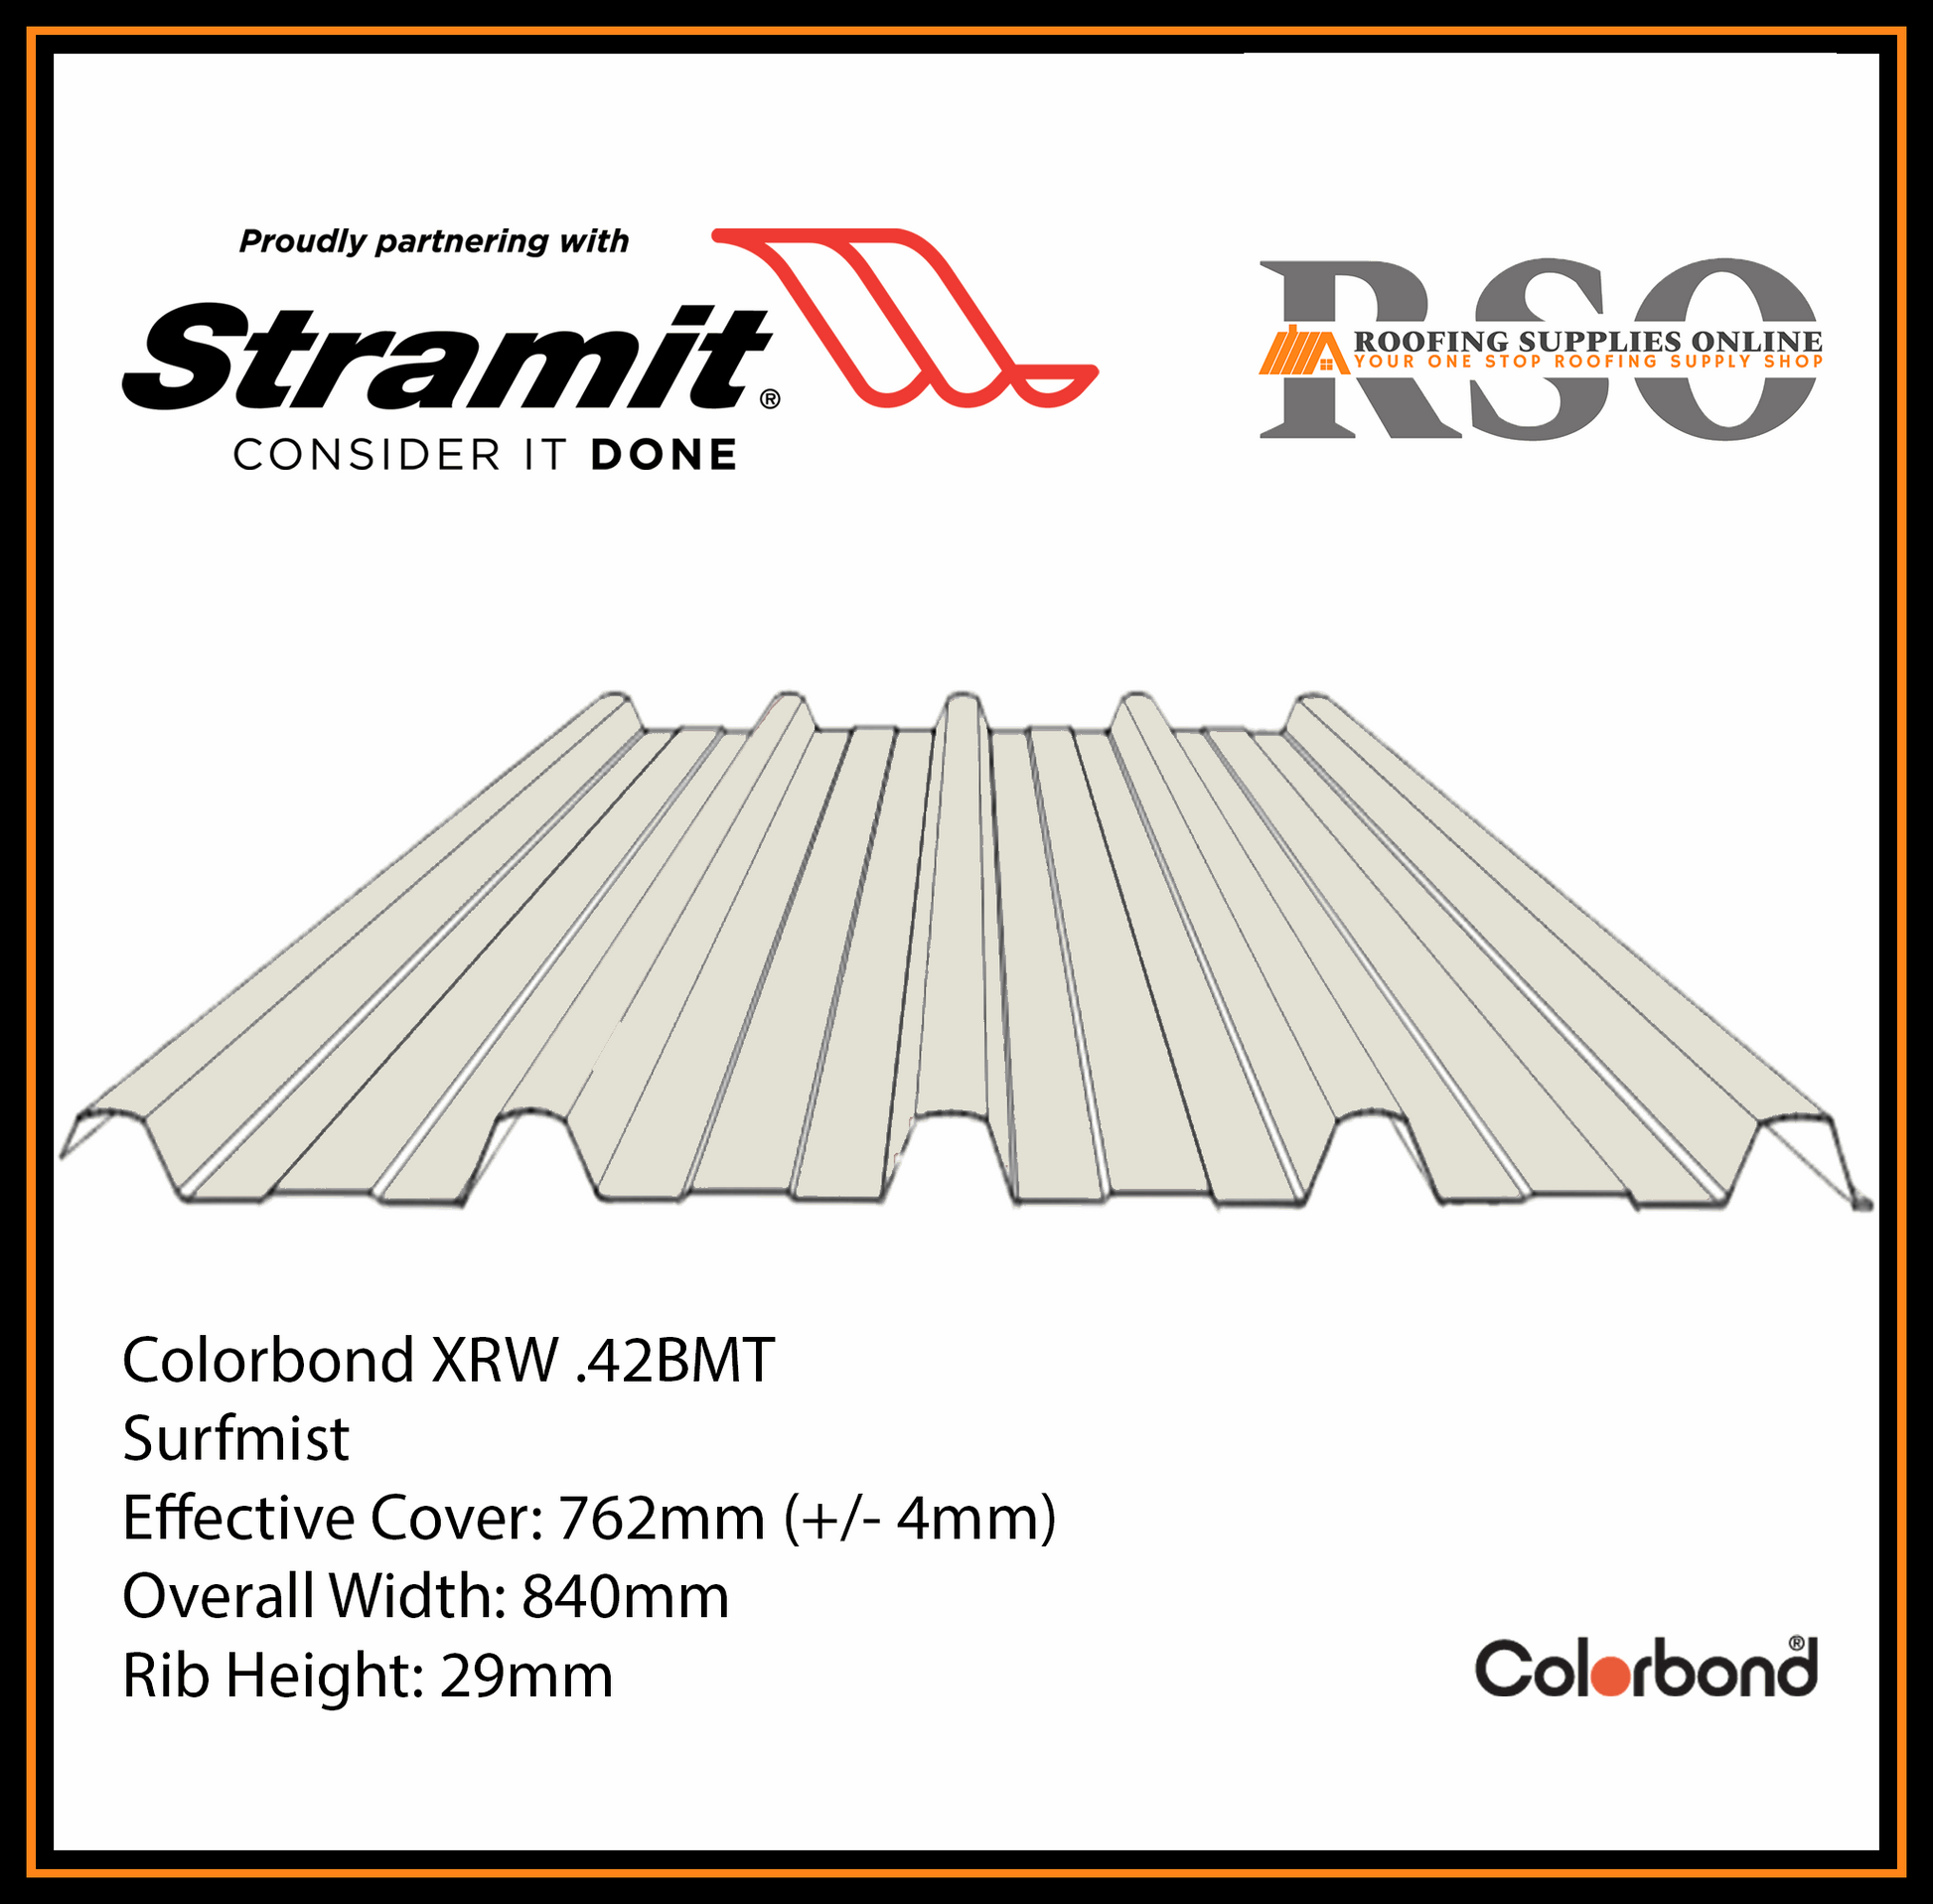 This is an illustration of a Monoclad profile roof sheet which is also known as 5 Rib or Trimdek profile. This Roof sheet's colour is called Surfmist